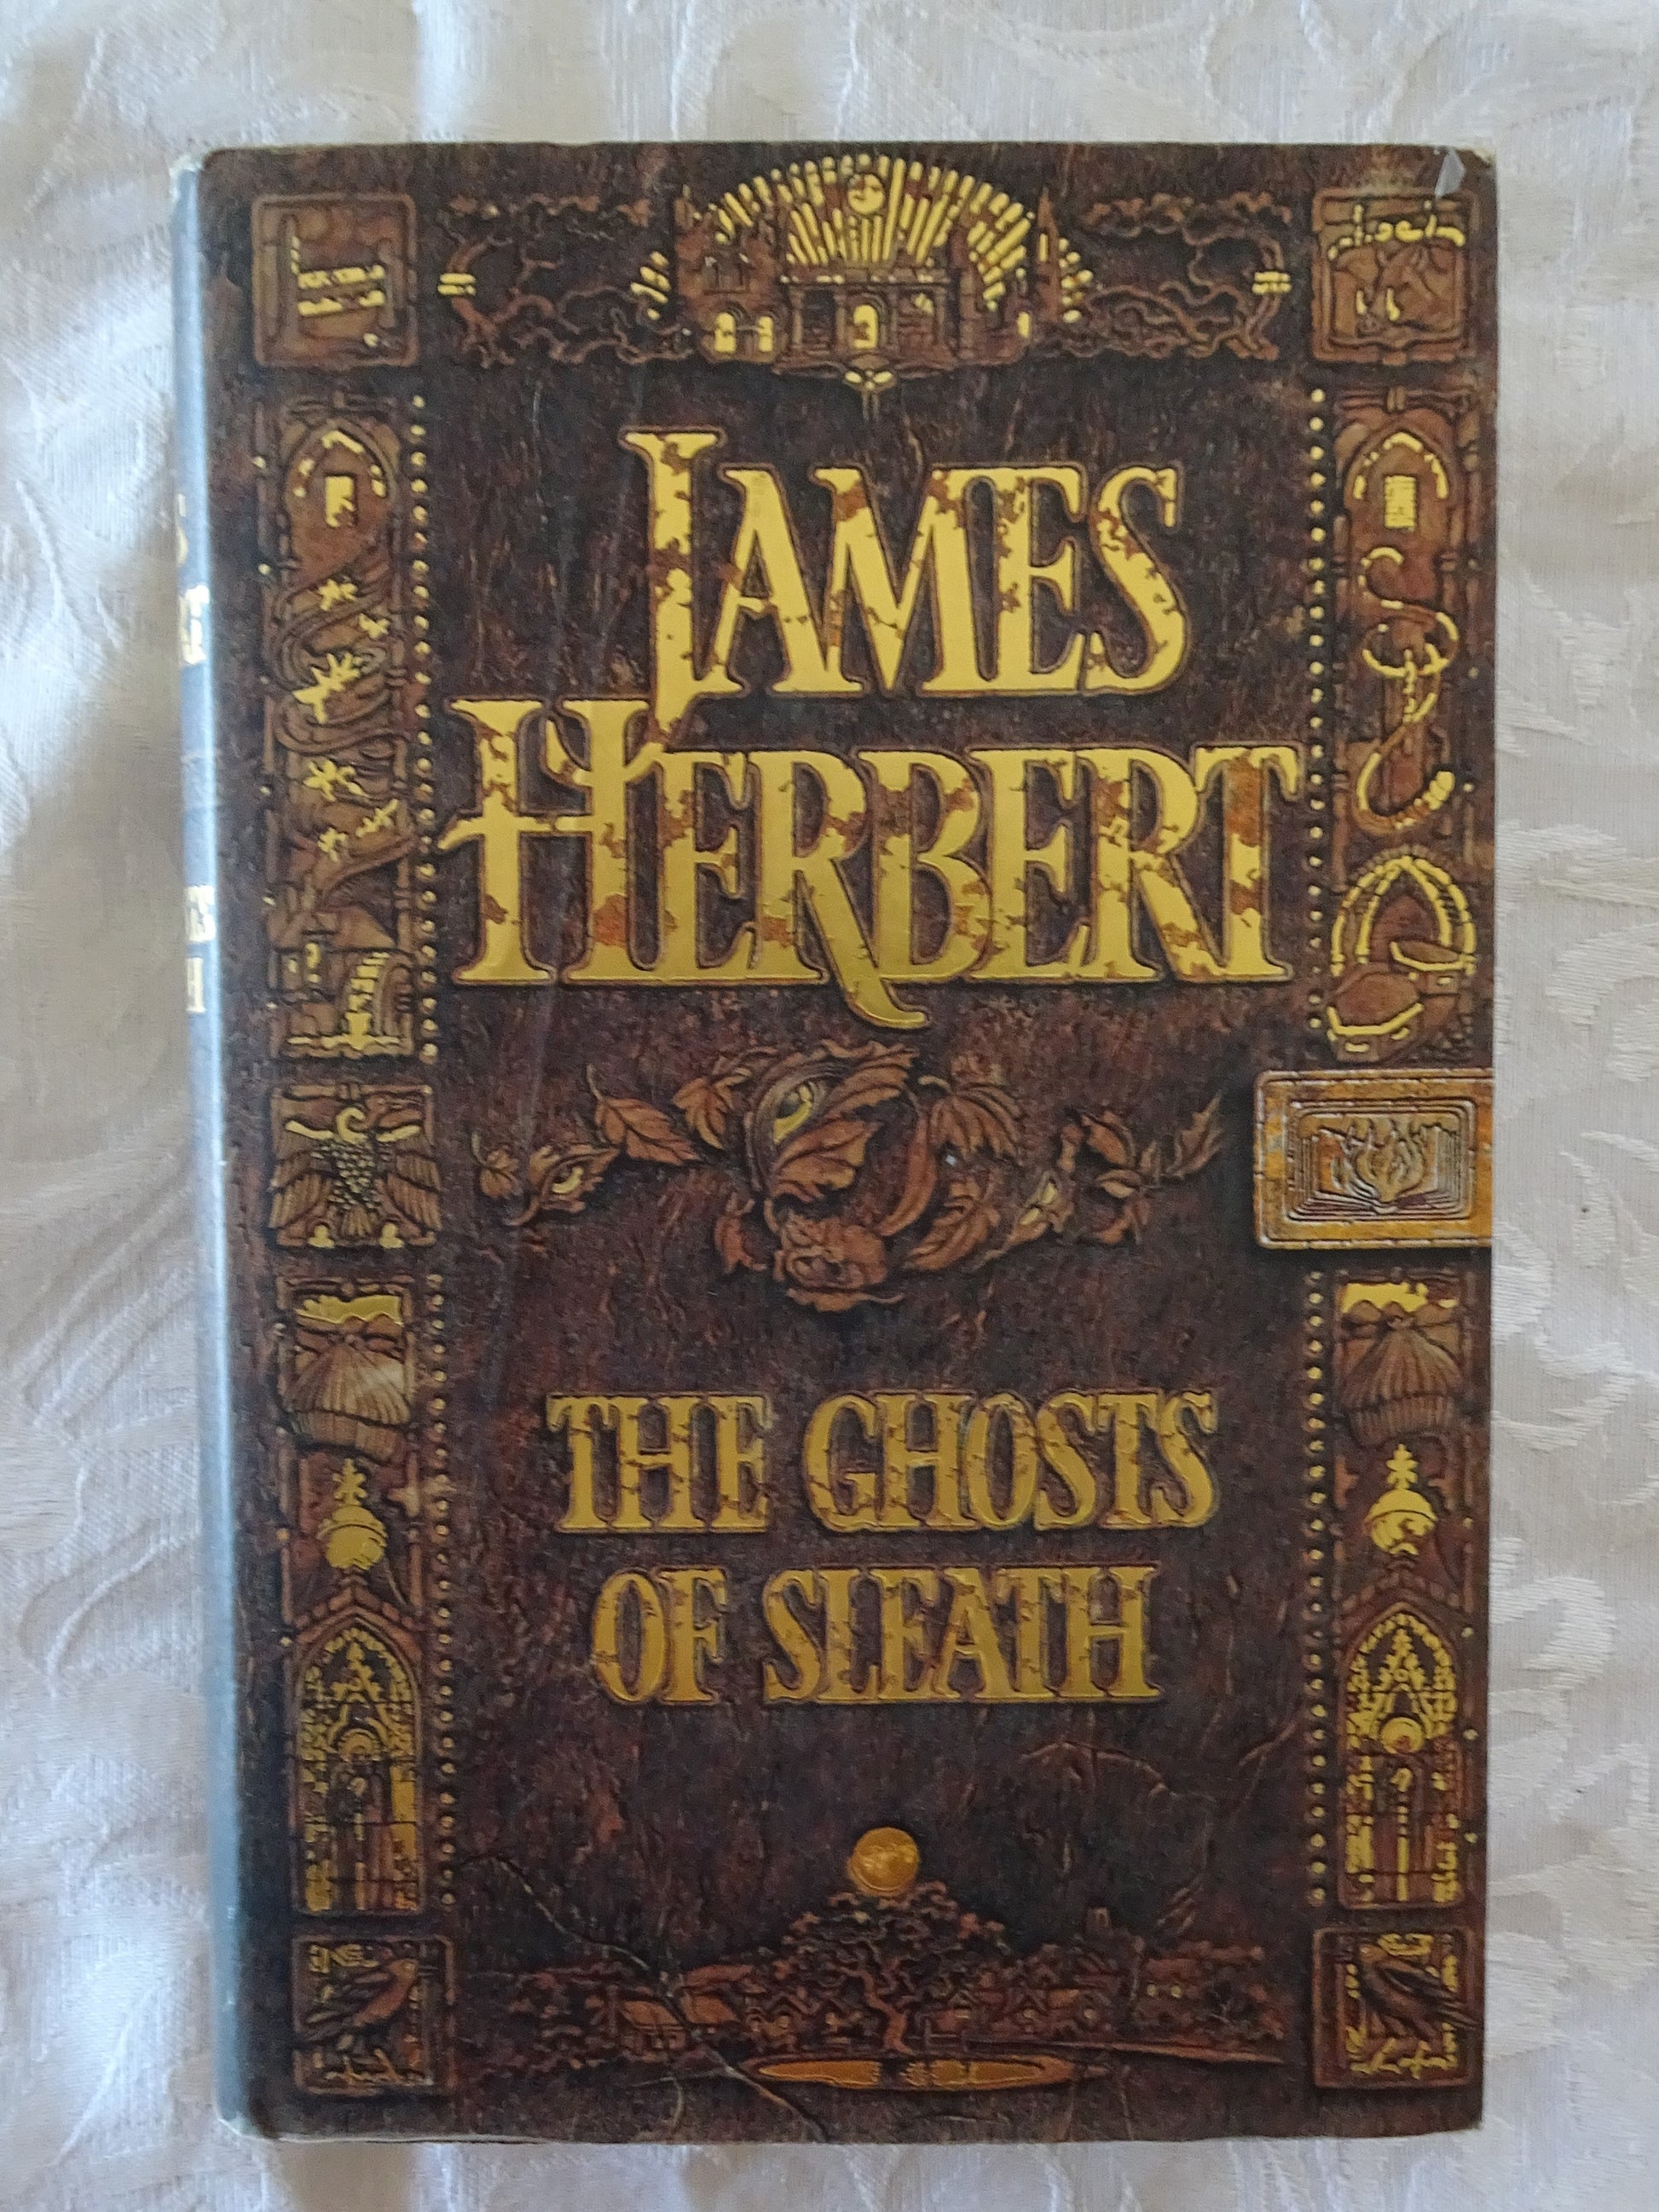 The Ghosts of Sleath  by James Herbert